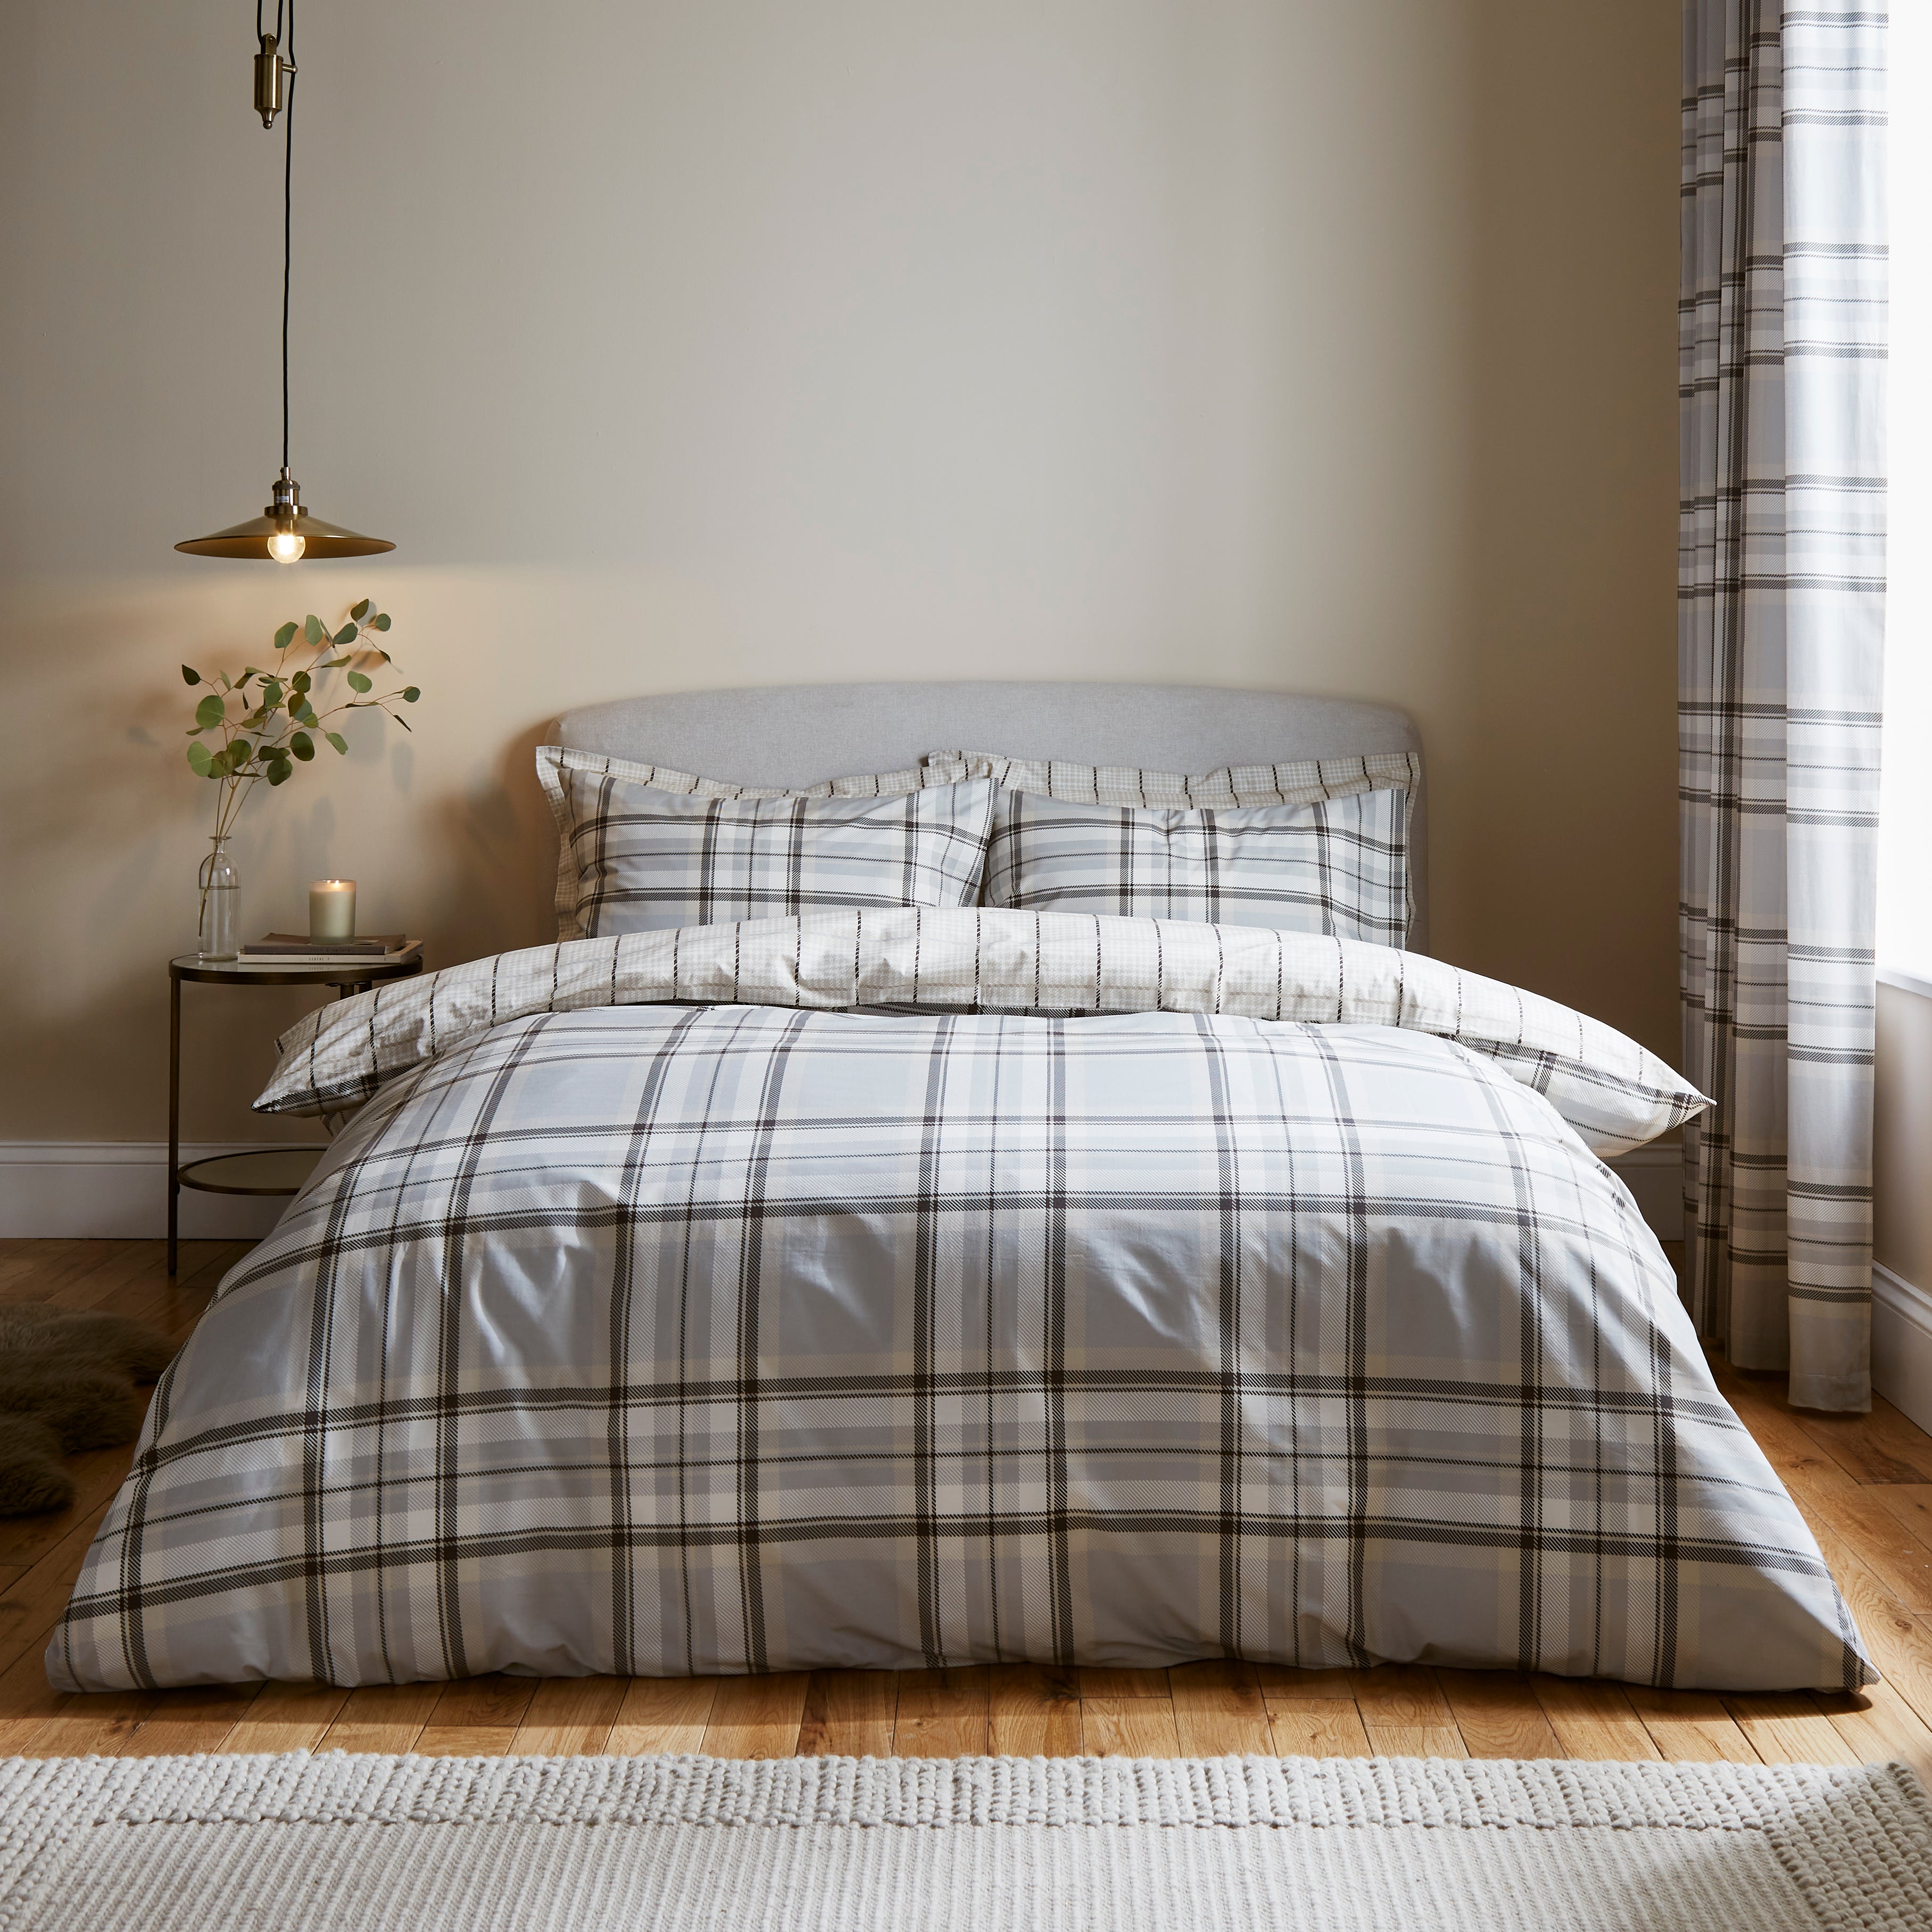 Piper Checked Grey Duvet Cover And Pillowcase Set Greywhite